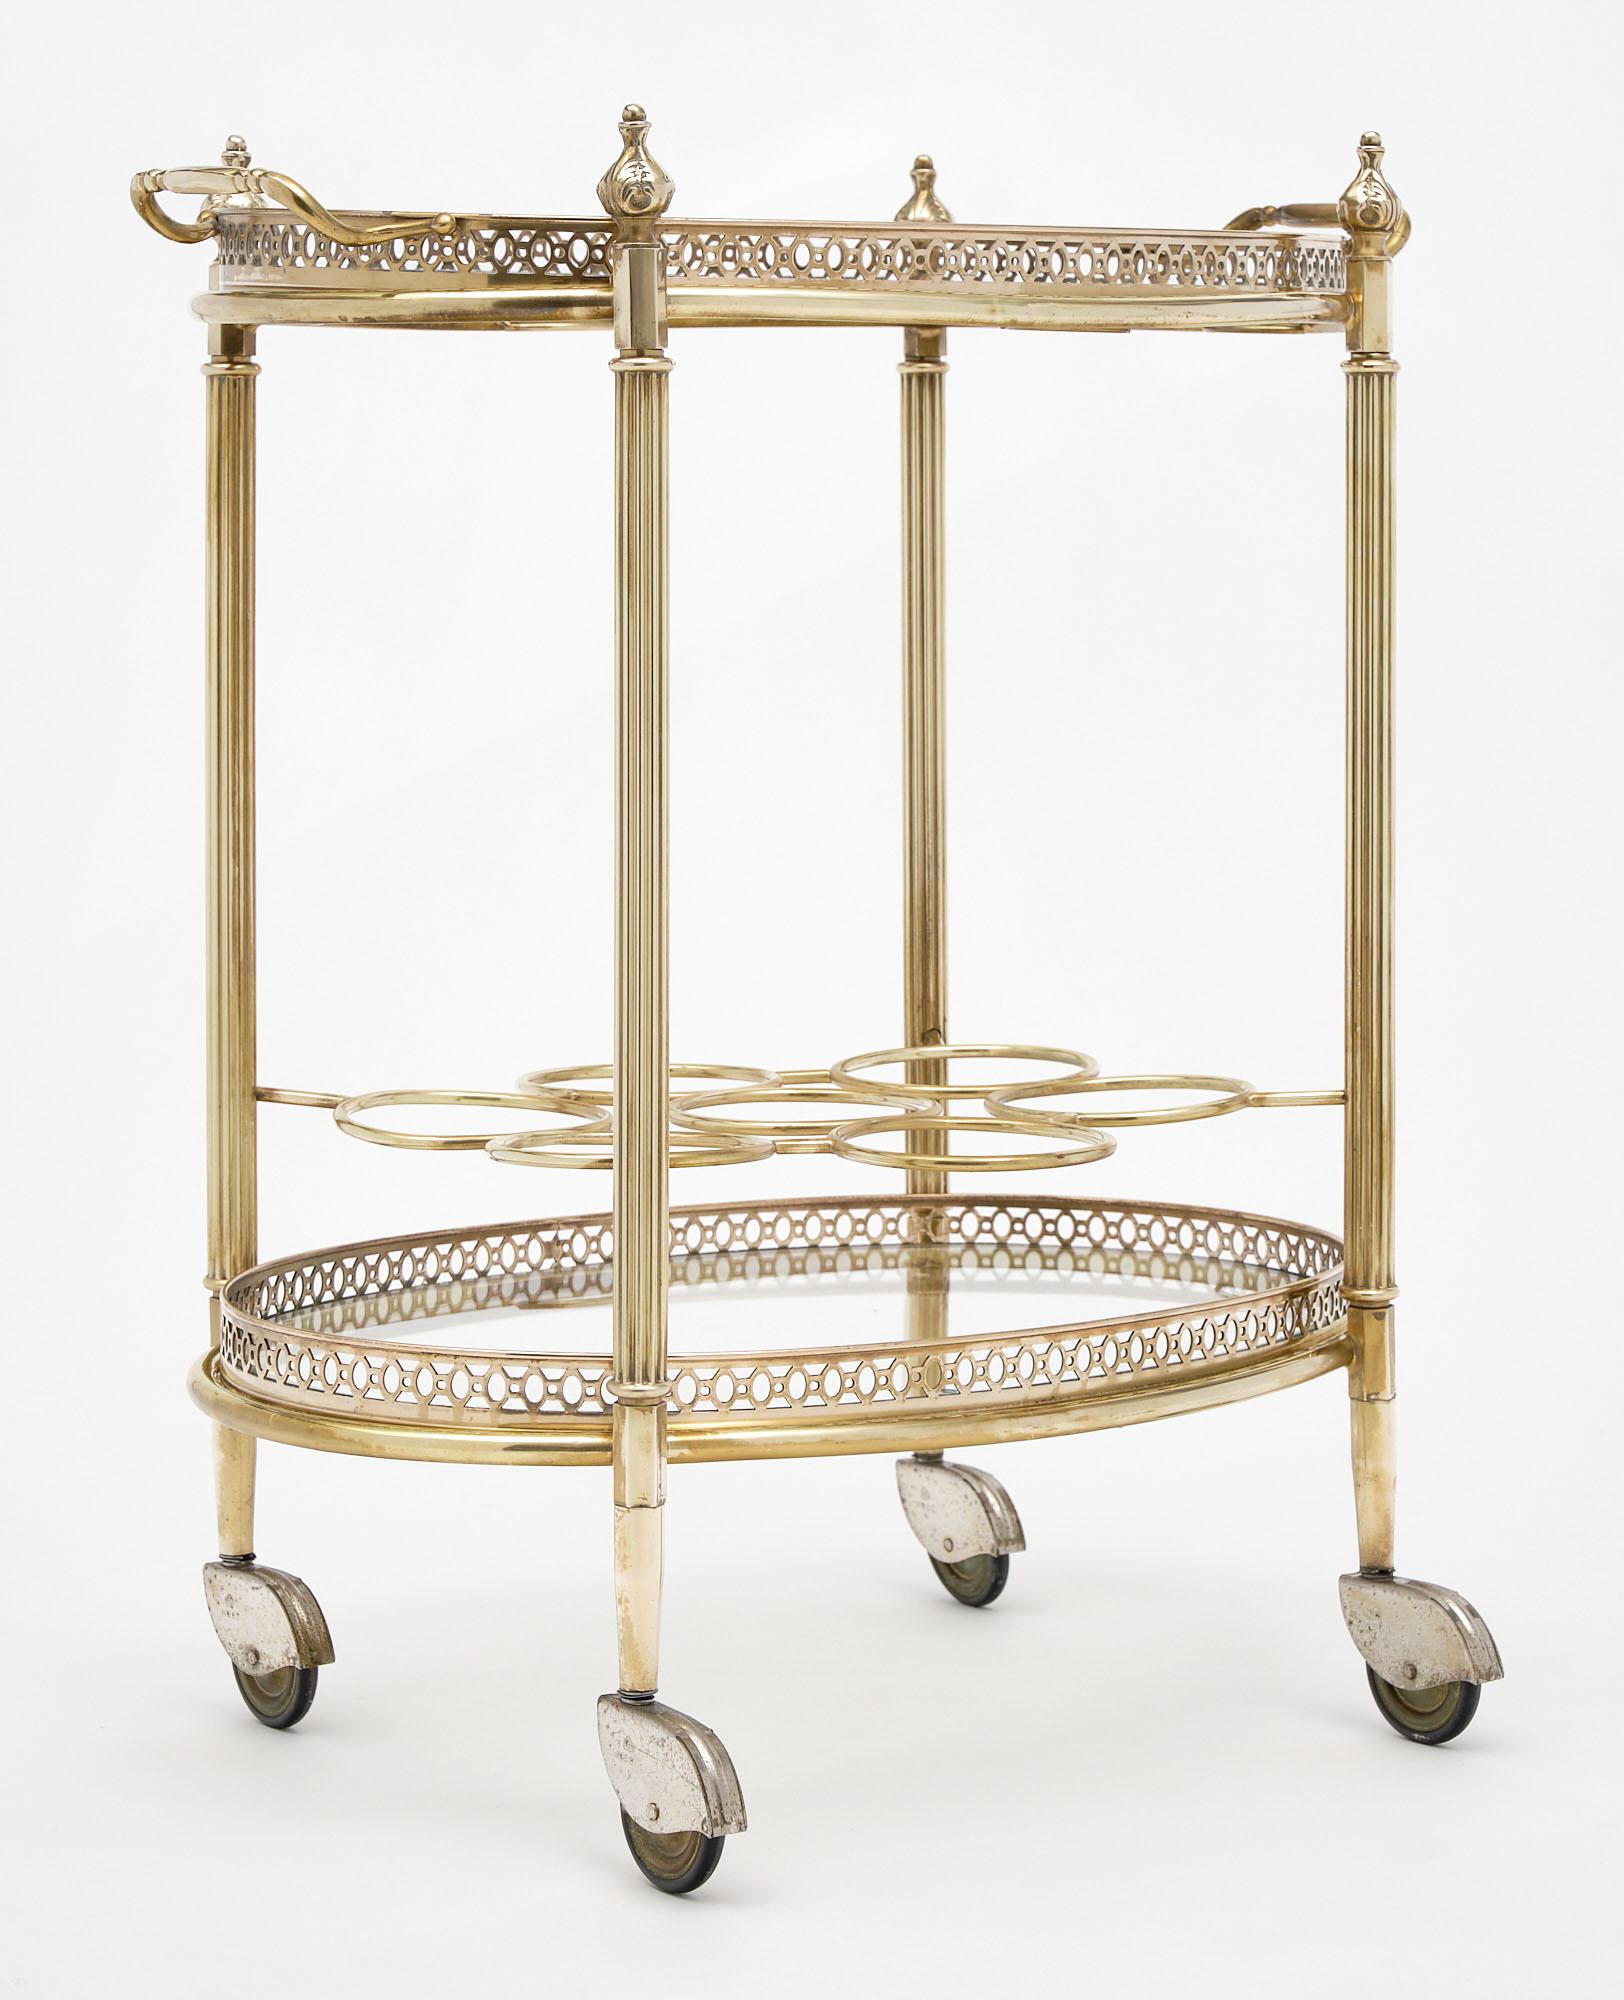 French Art Deco period bar cart made of gilt brass with two glass shelves. The top surface is a detachable tray; and the bottom features a bottle holder. The legs supporting the piece are ridged and on casters.